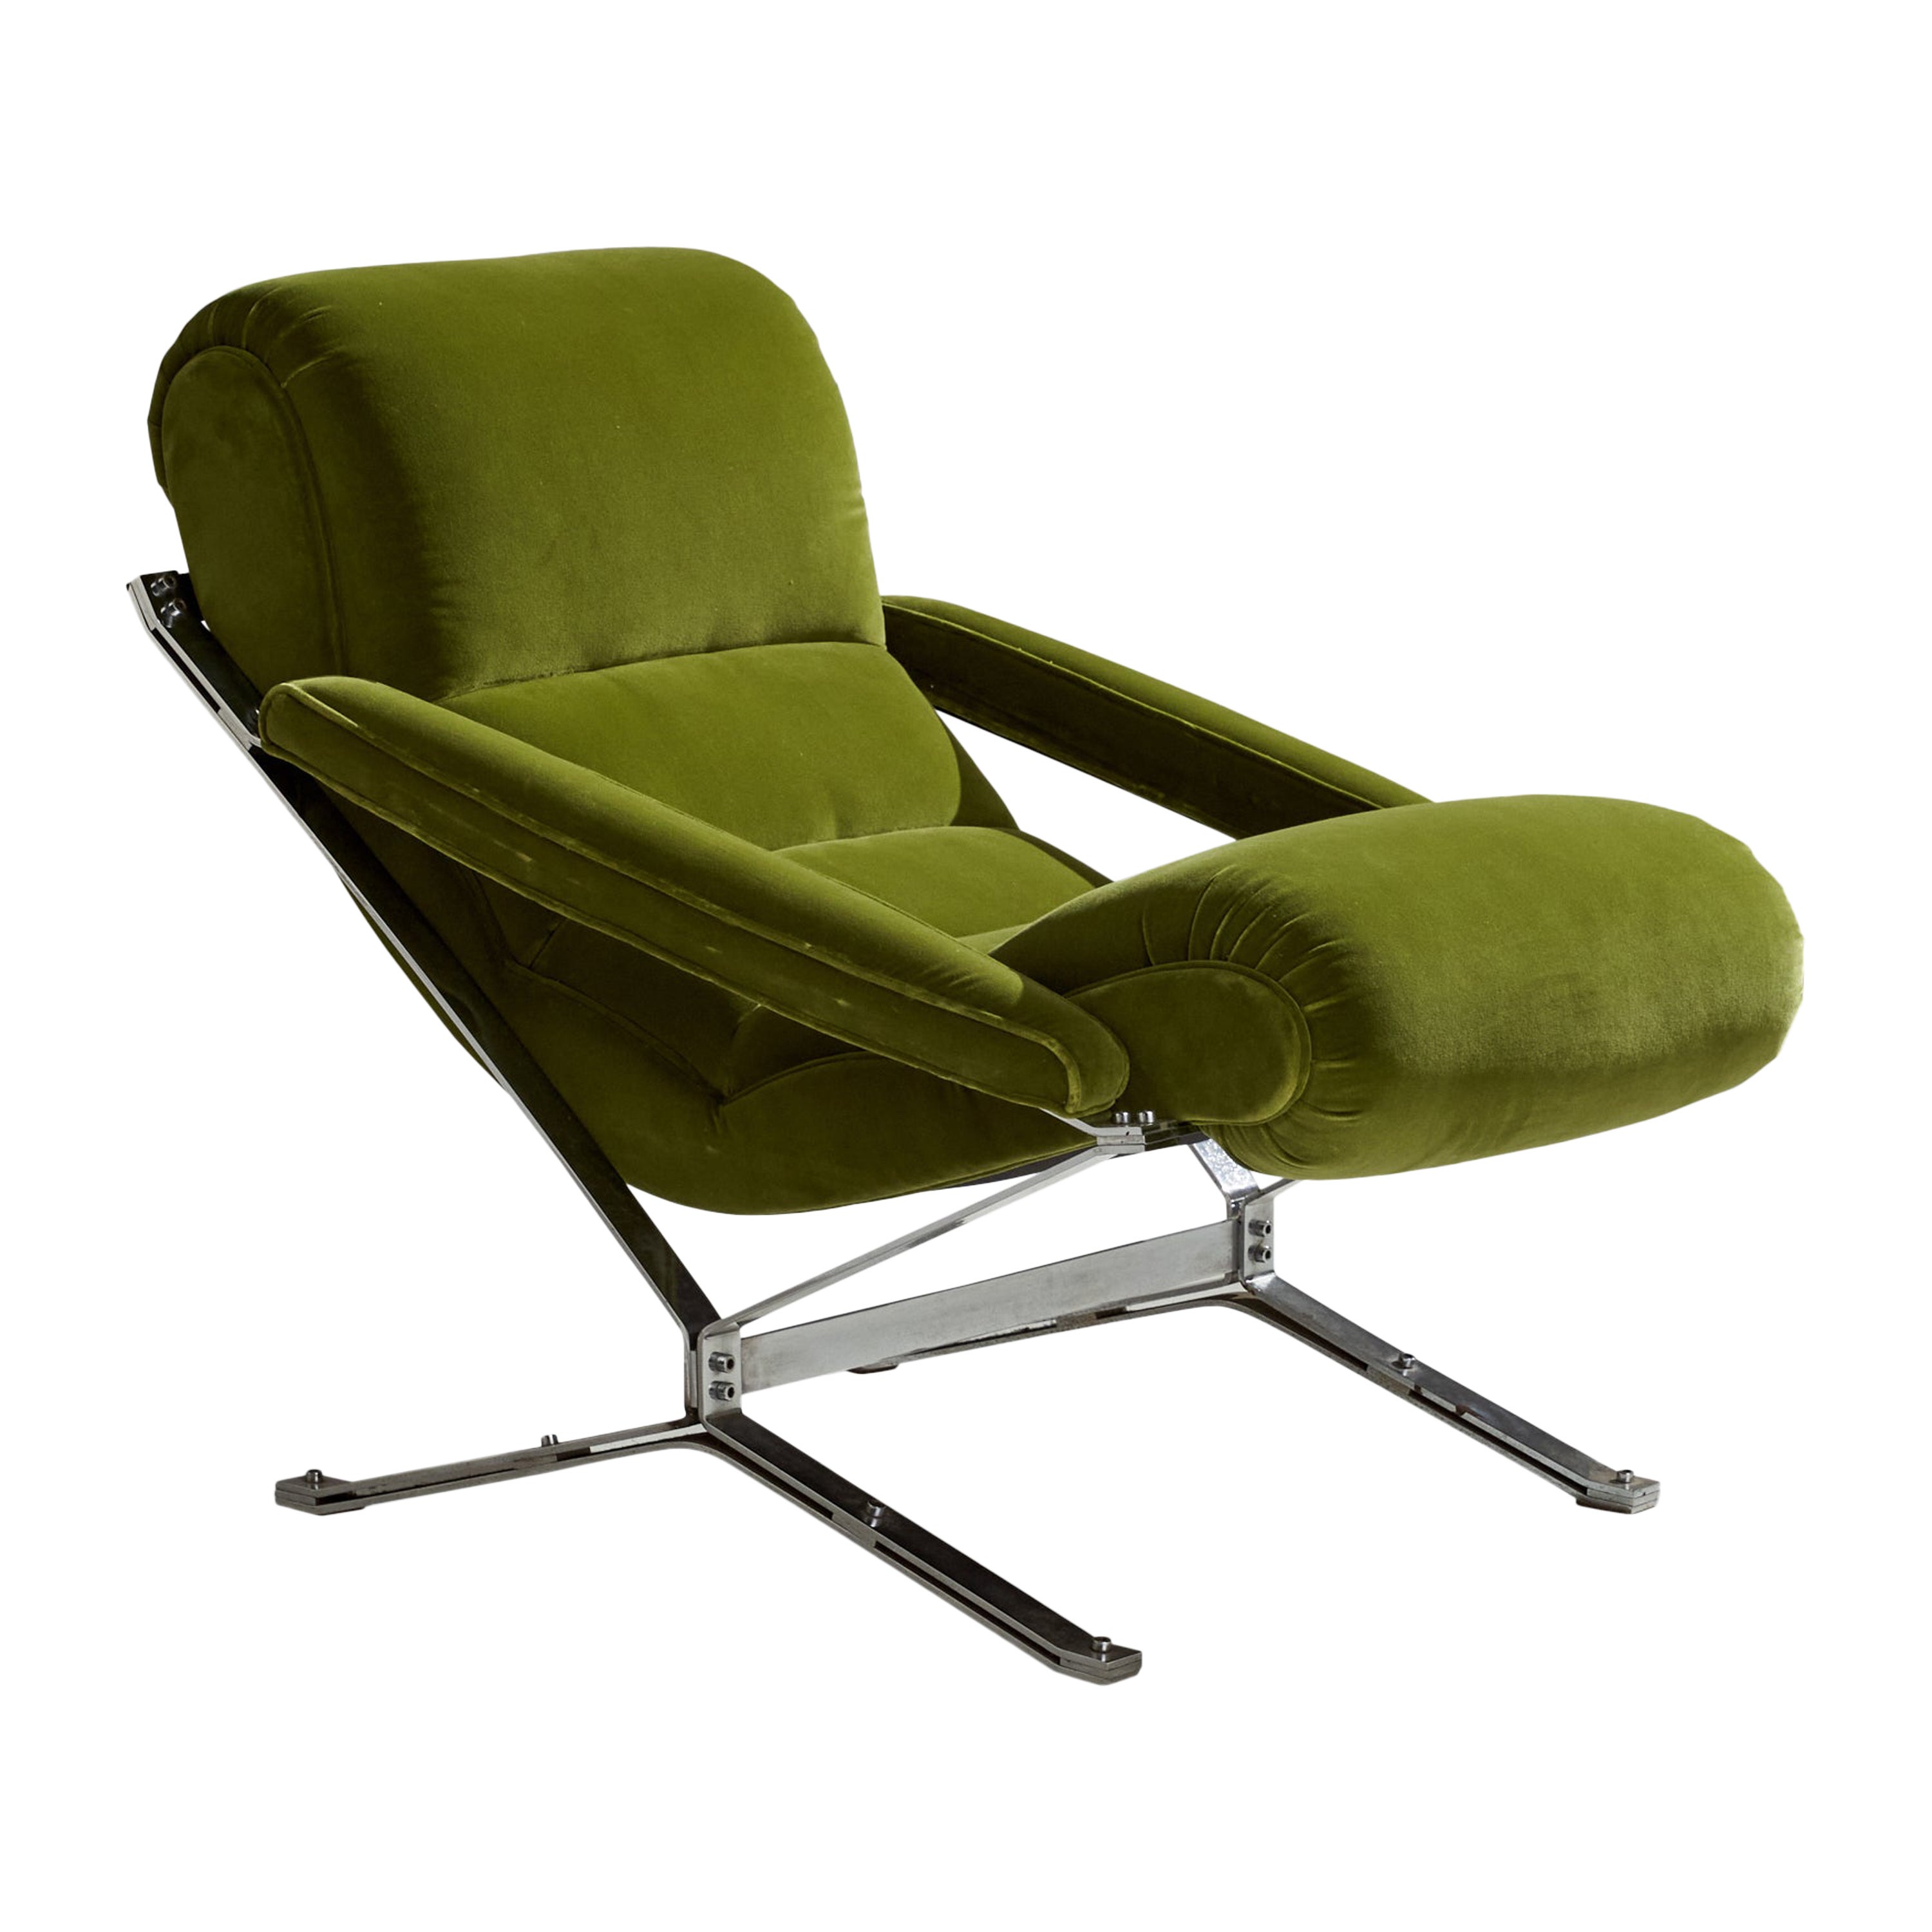 Giulio Moscatelli, Rocking Chair, Metal, Velvet, Italy, c. 1960s For Sale